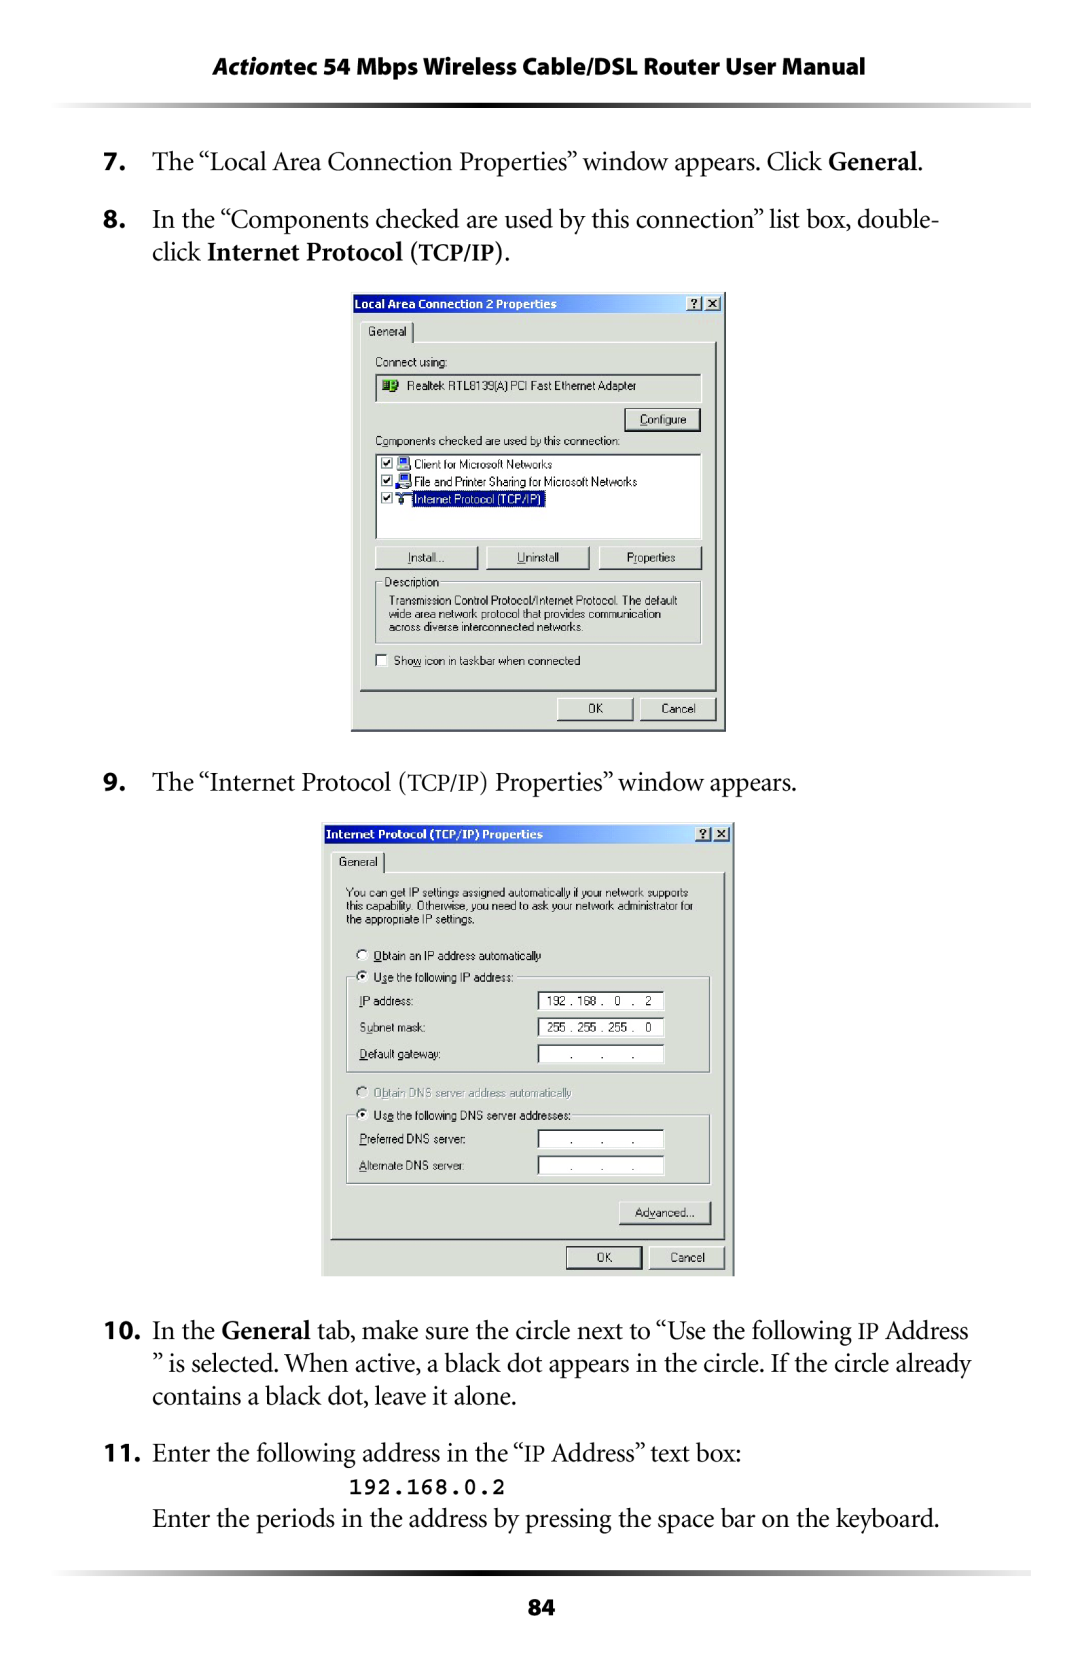 Actiontec electronic GT704WR user manual The “Internet Protocol TCP/IP Properties” window appears 